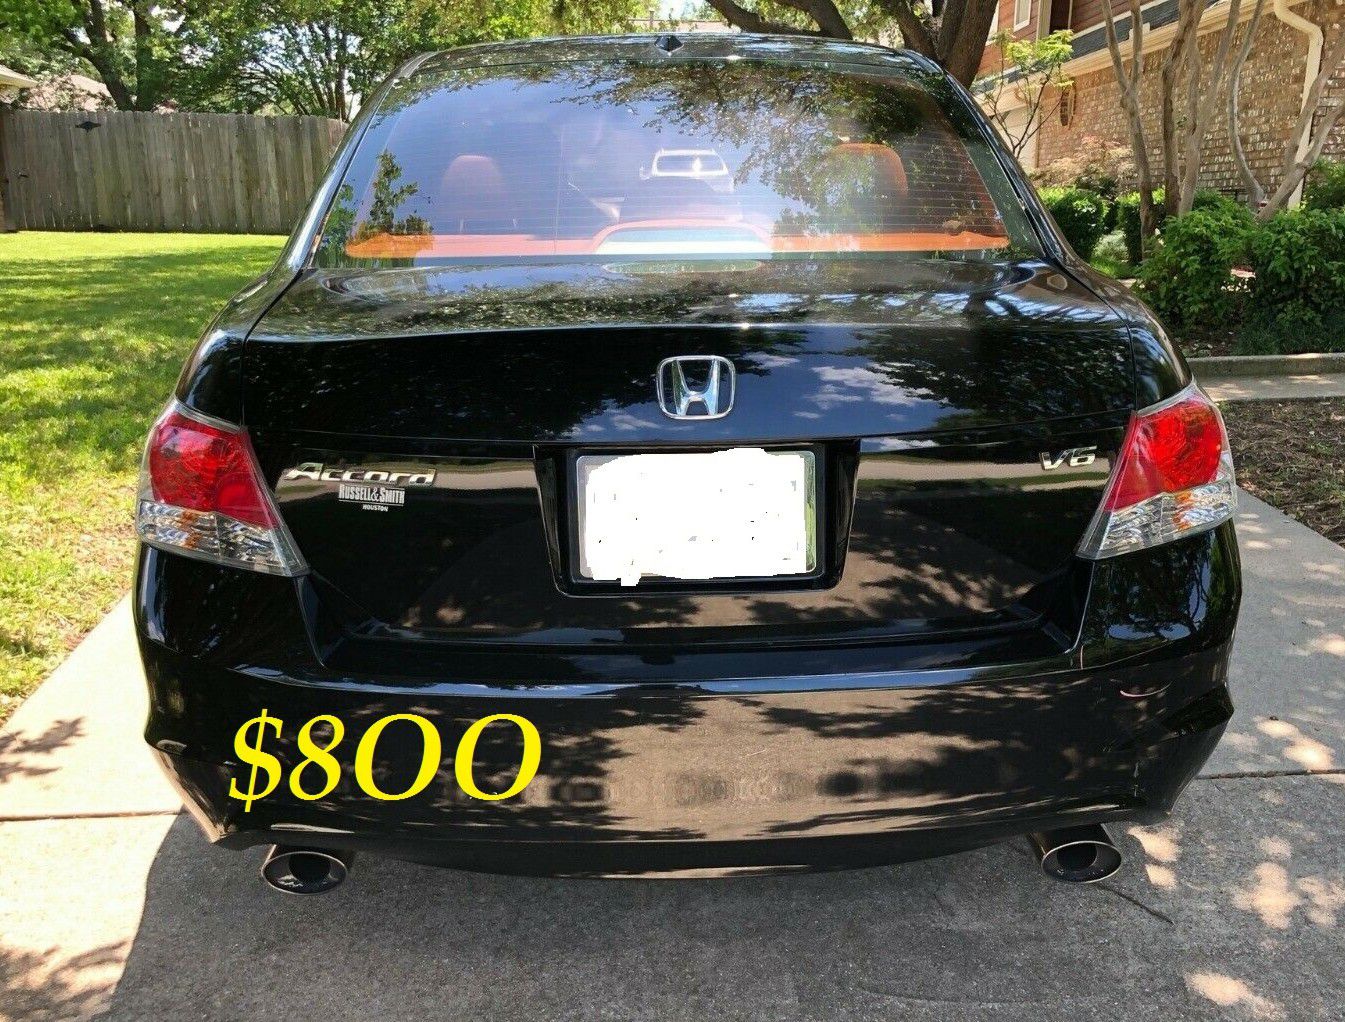 💝🔑💝$8OO For Sale is my 2OO9 Honda Accord Clean tittle! Comfortable fully loaded.💝🔑💝